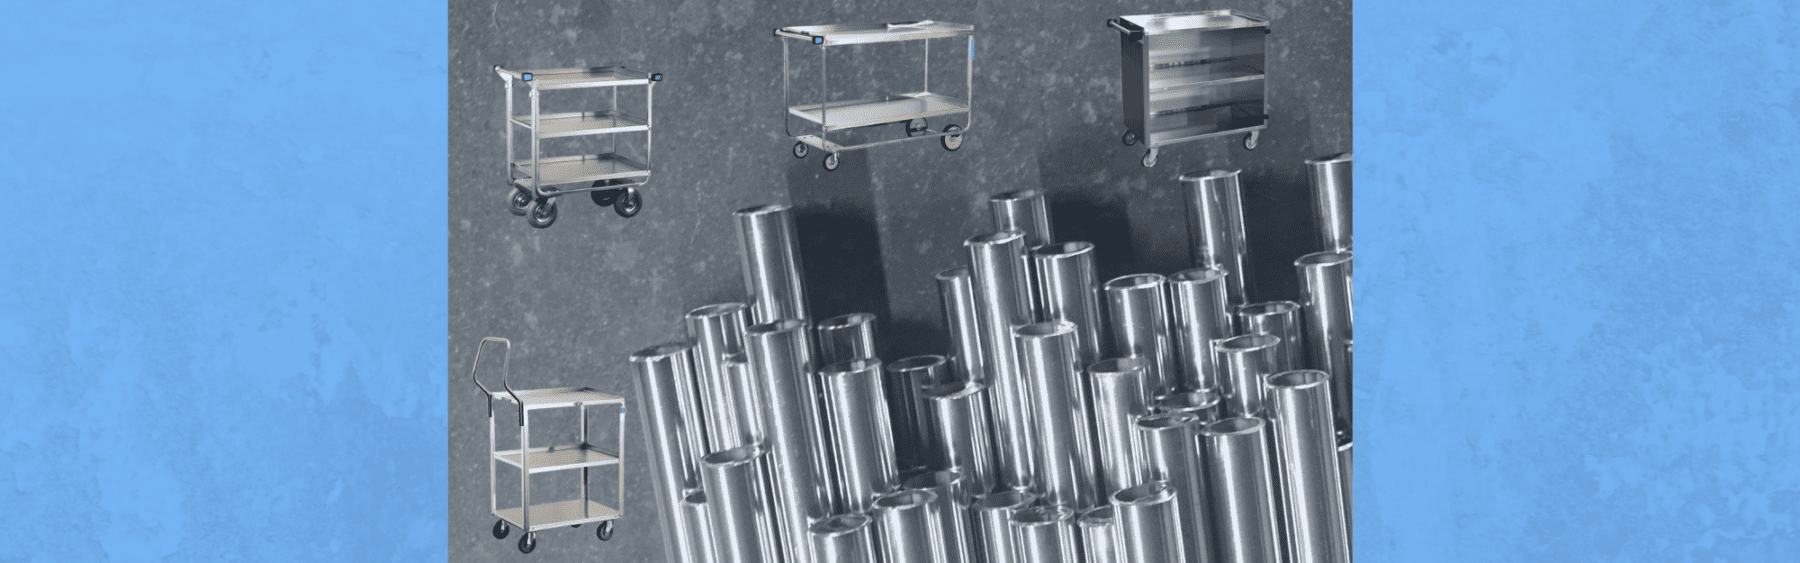 utility carts around stainless steel